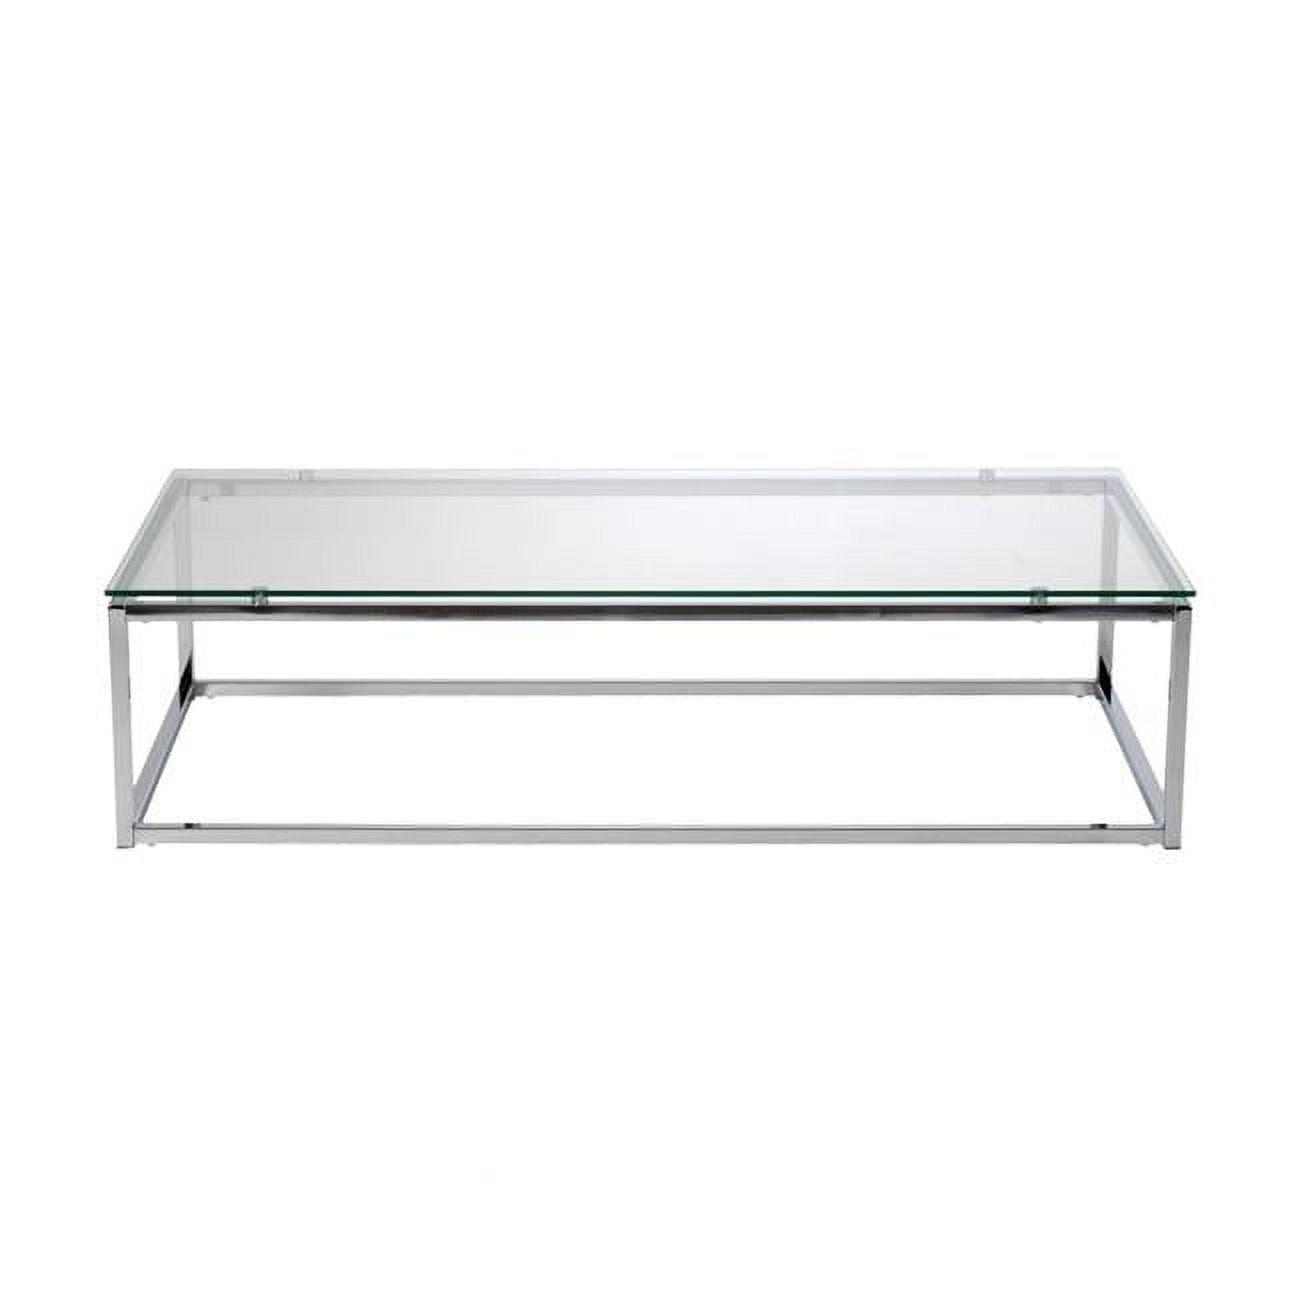 Elevate 47.8'' Clear Glass Rectangular Coffee Table with Chrome Lift-Top